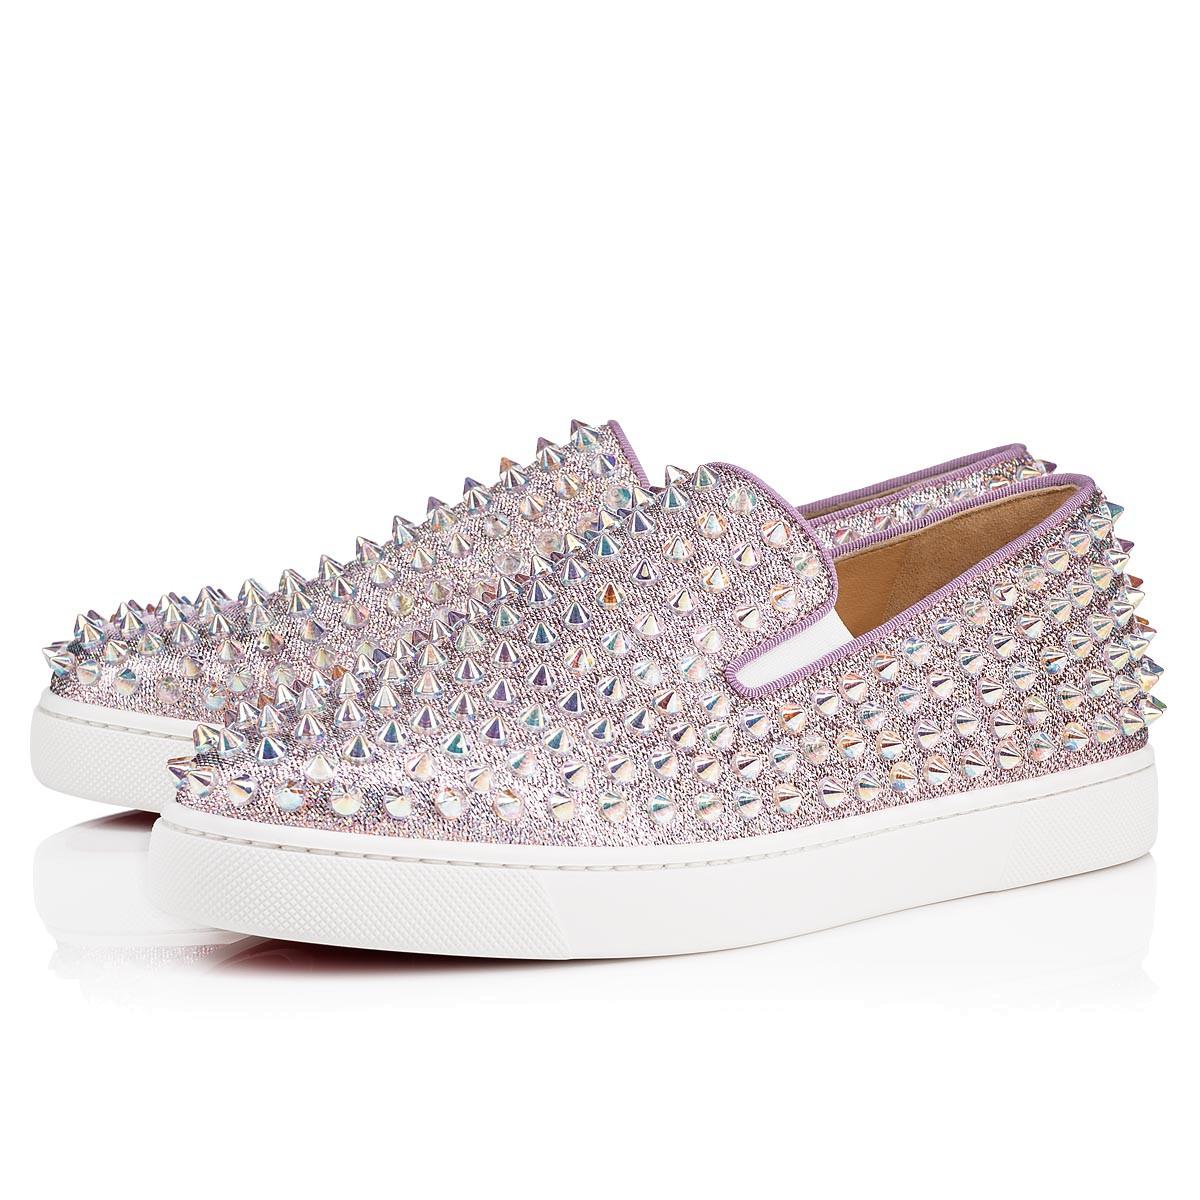 Christian Louboutin Roller Boat Woman Flat In Lupin/clear Ab | ModeSens